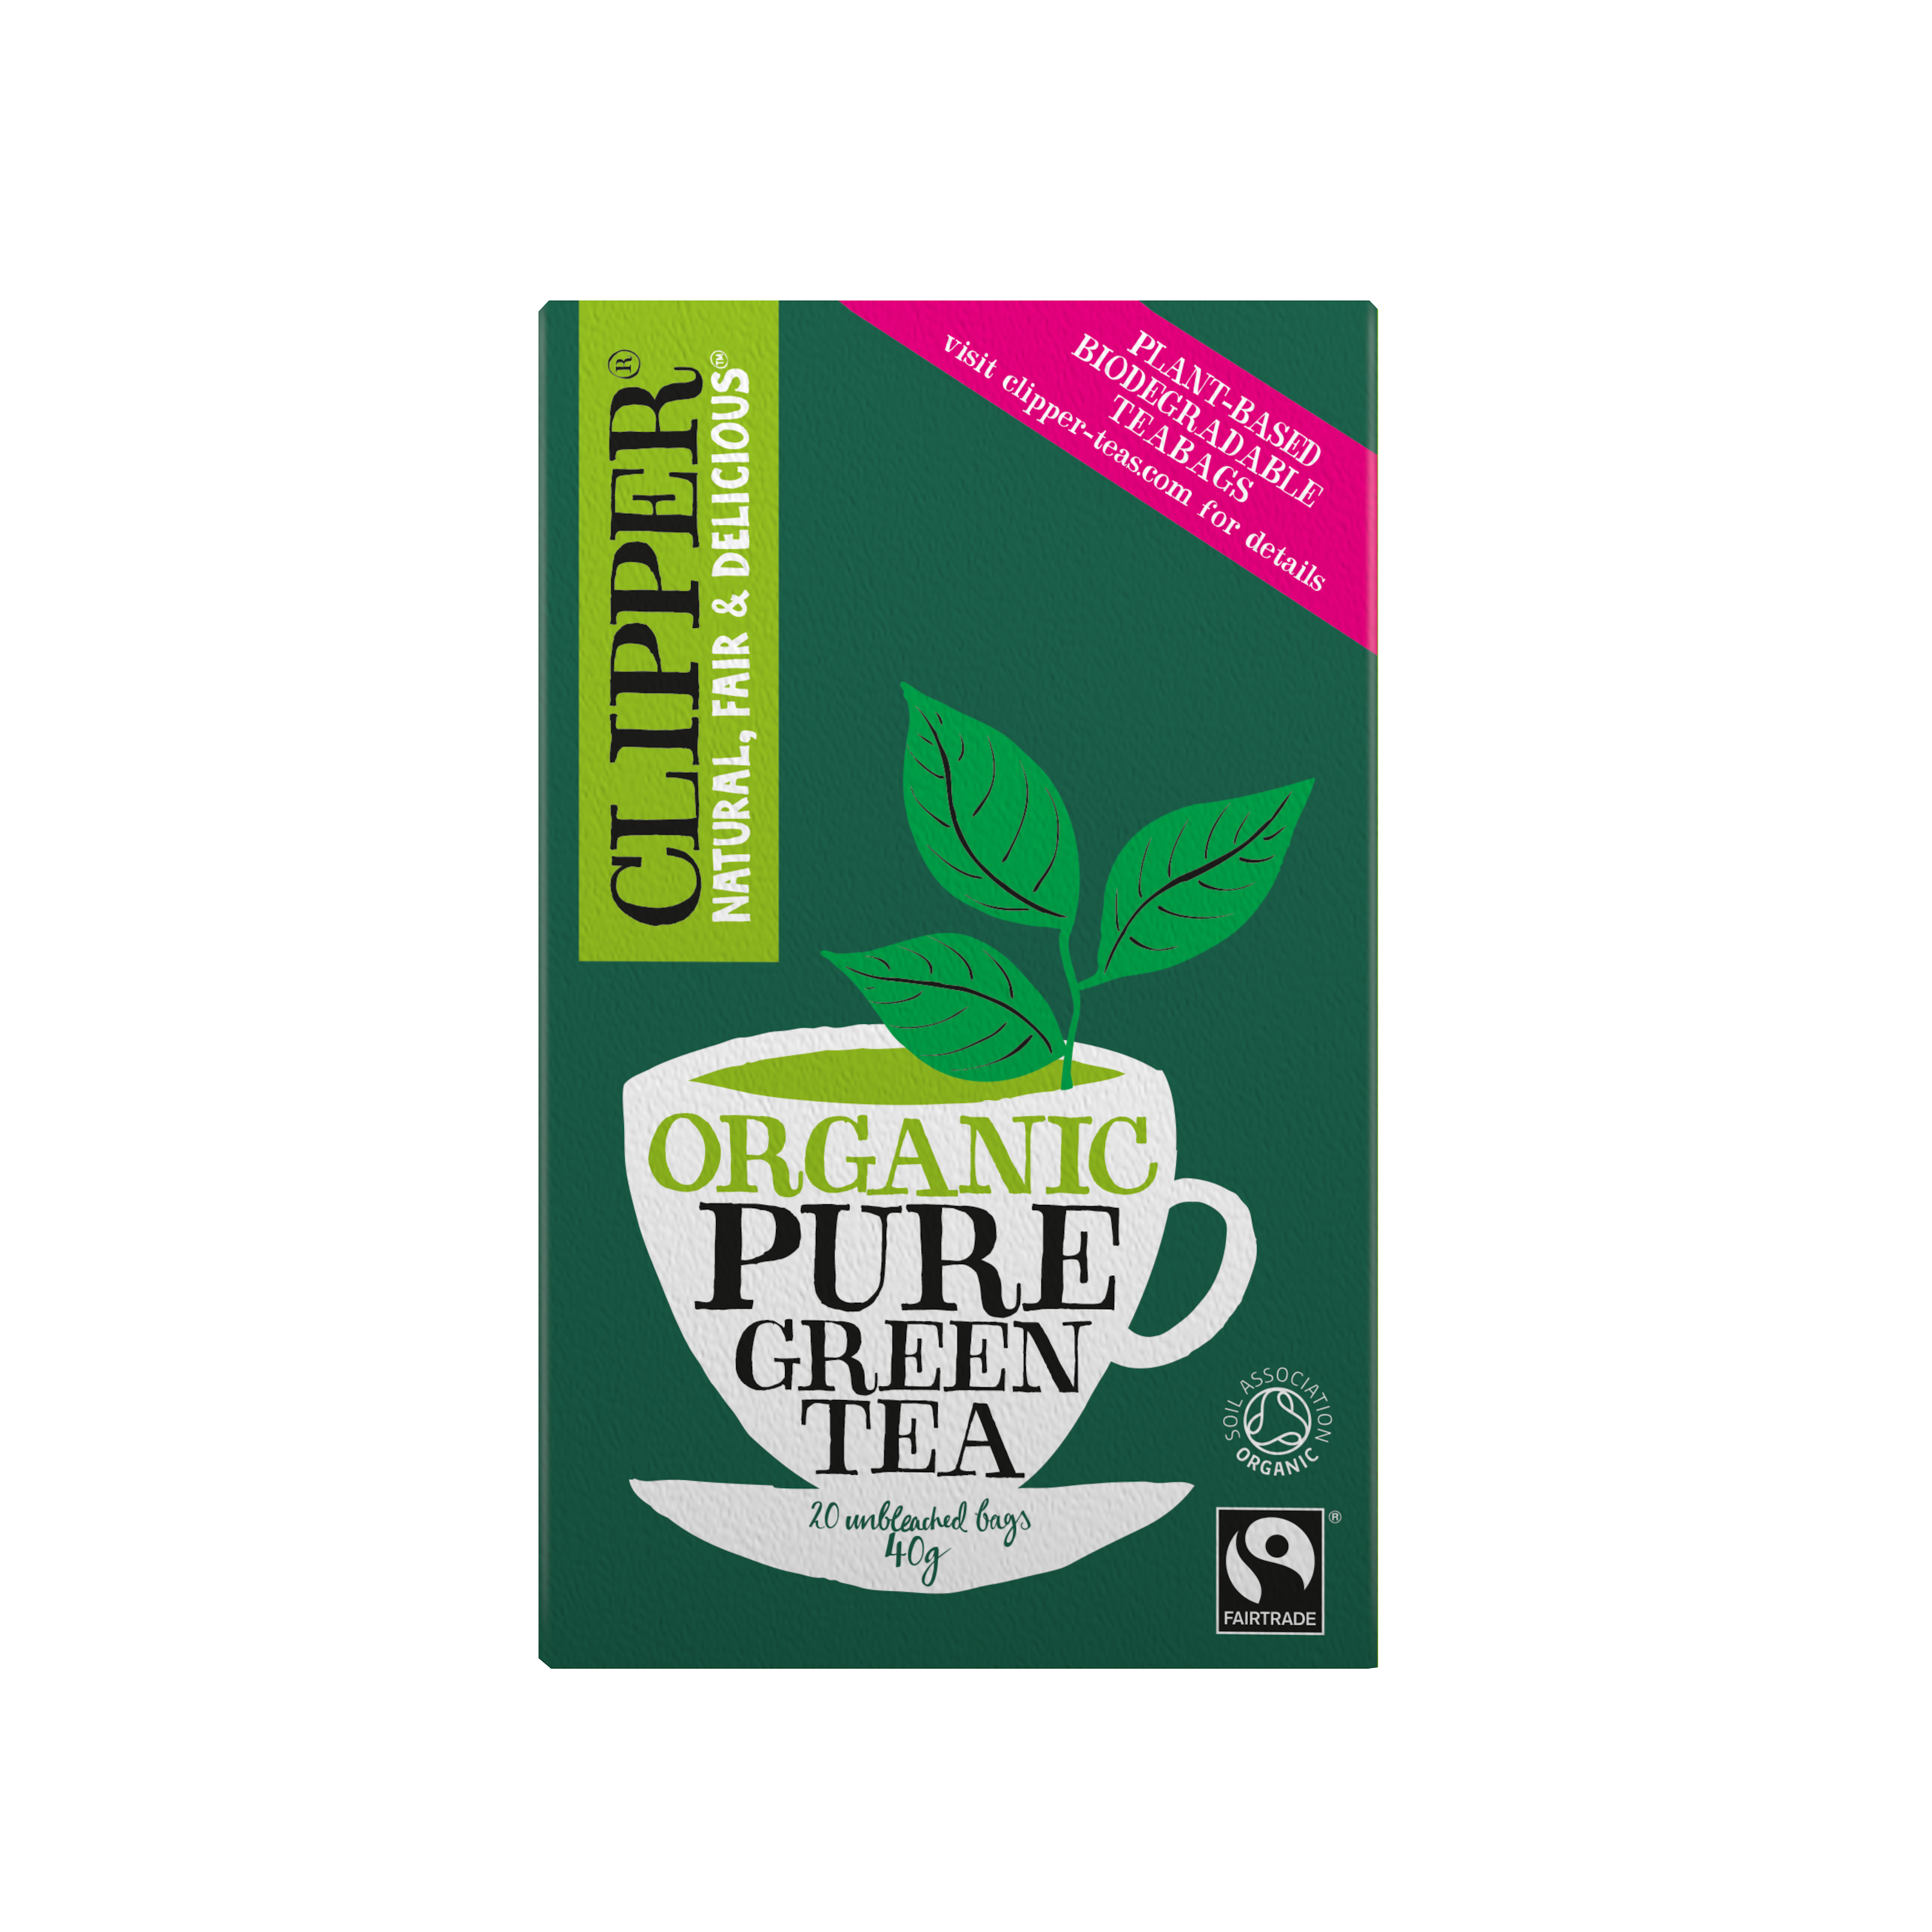 Clipper Tea Organic Fairtrade Variety Selection 16 Flavours, 32 Enveloped  Teabags 